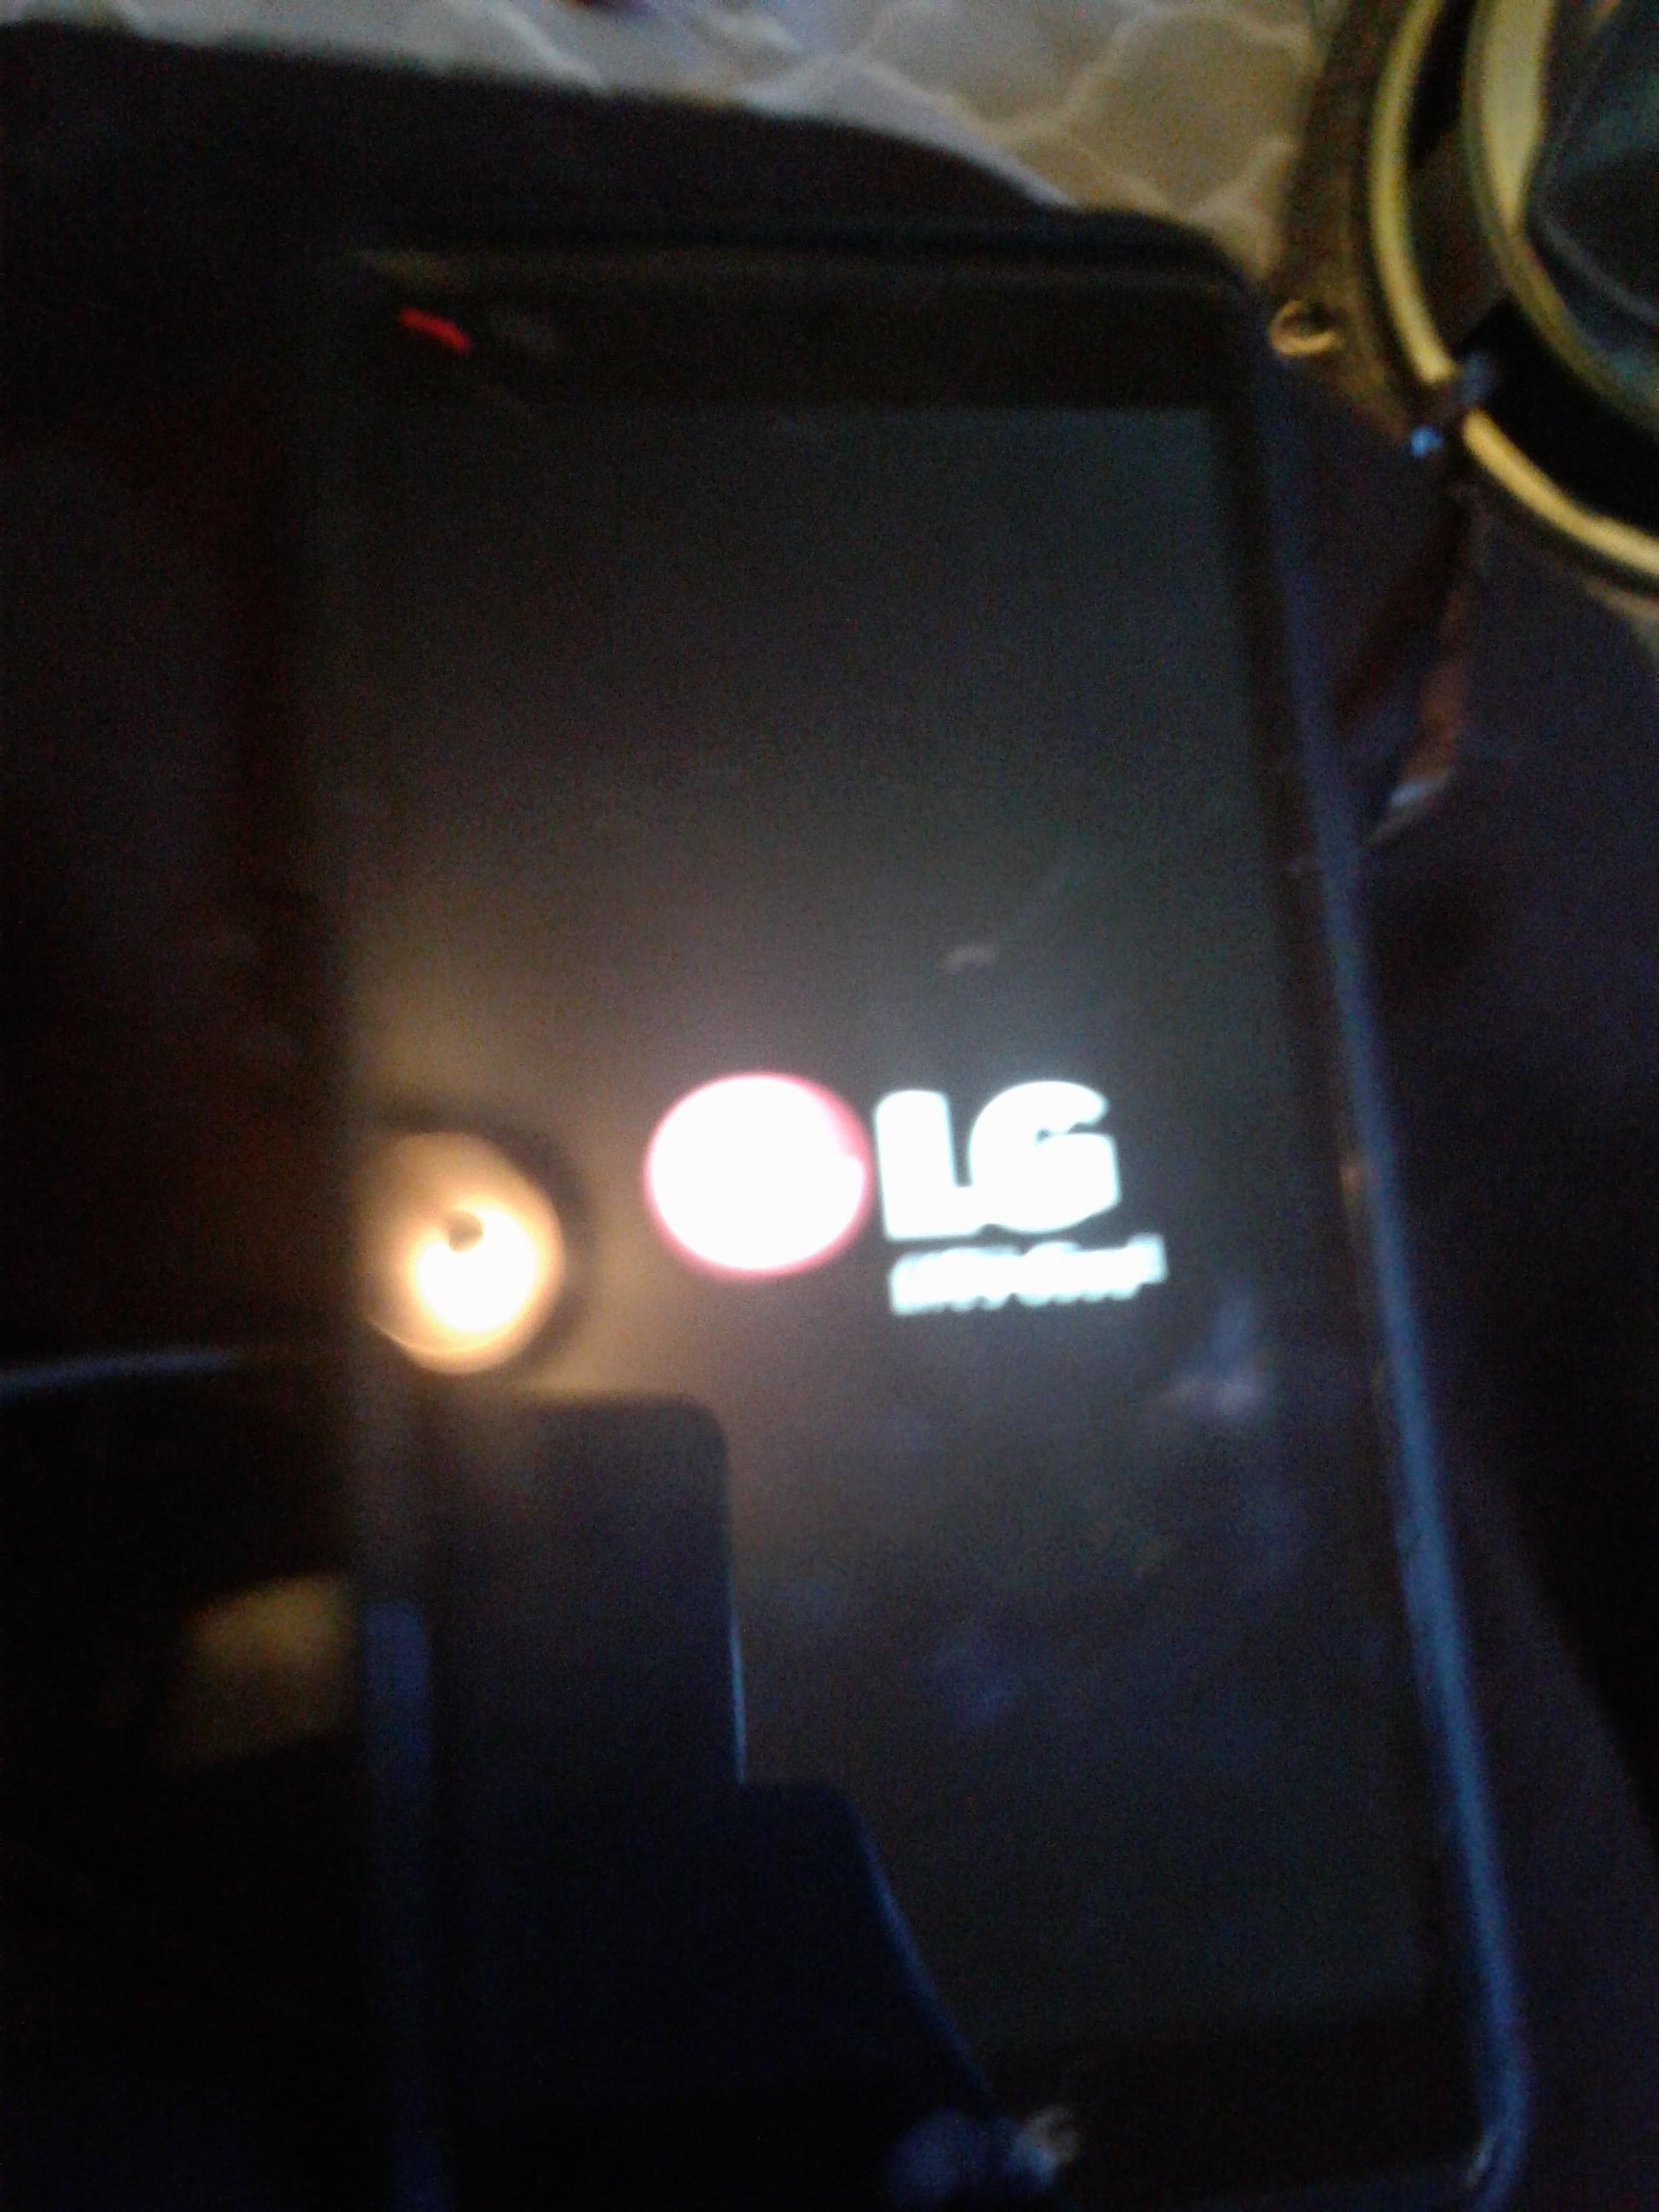 LG phone in great condition like new Metro PCS must pick up in southeast dc southeast please don't waste my time thank you